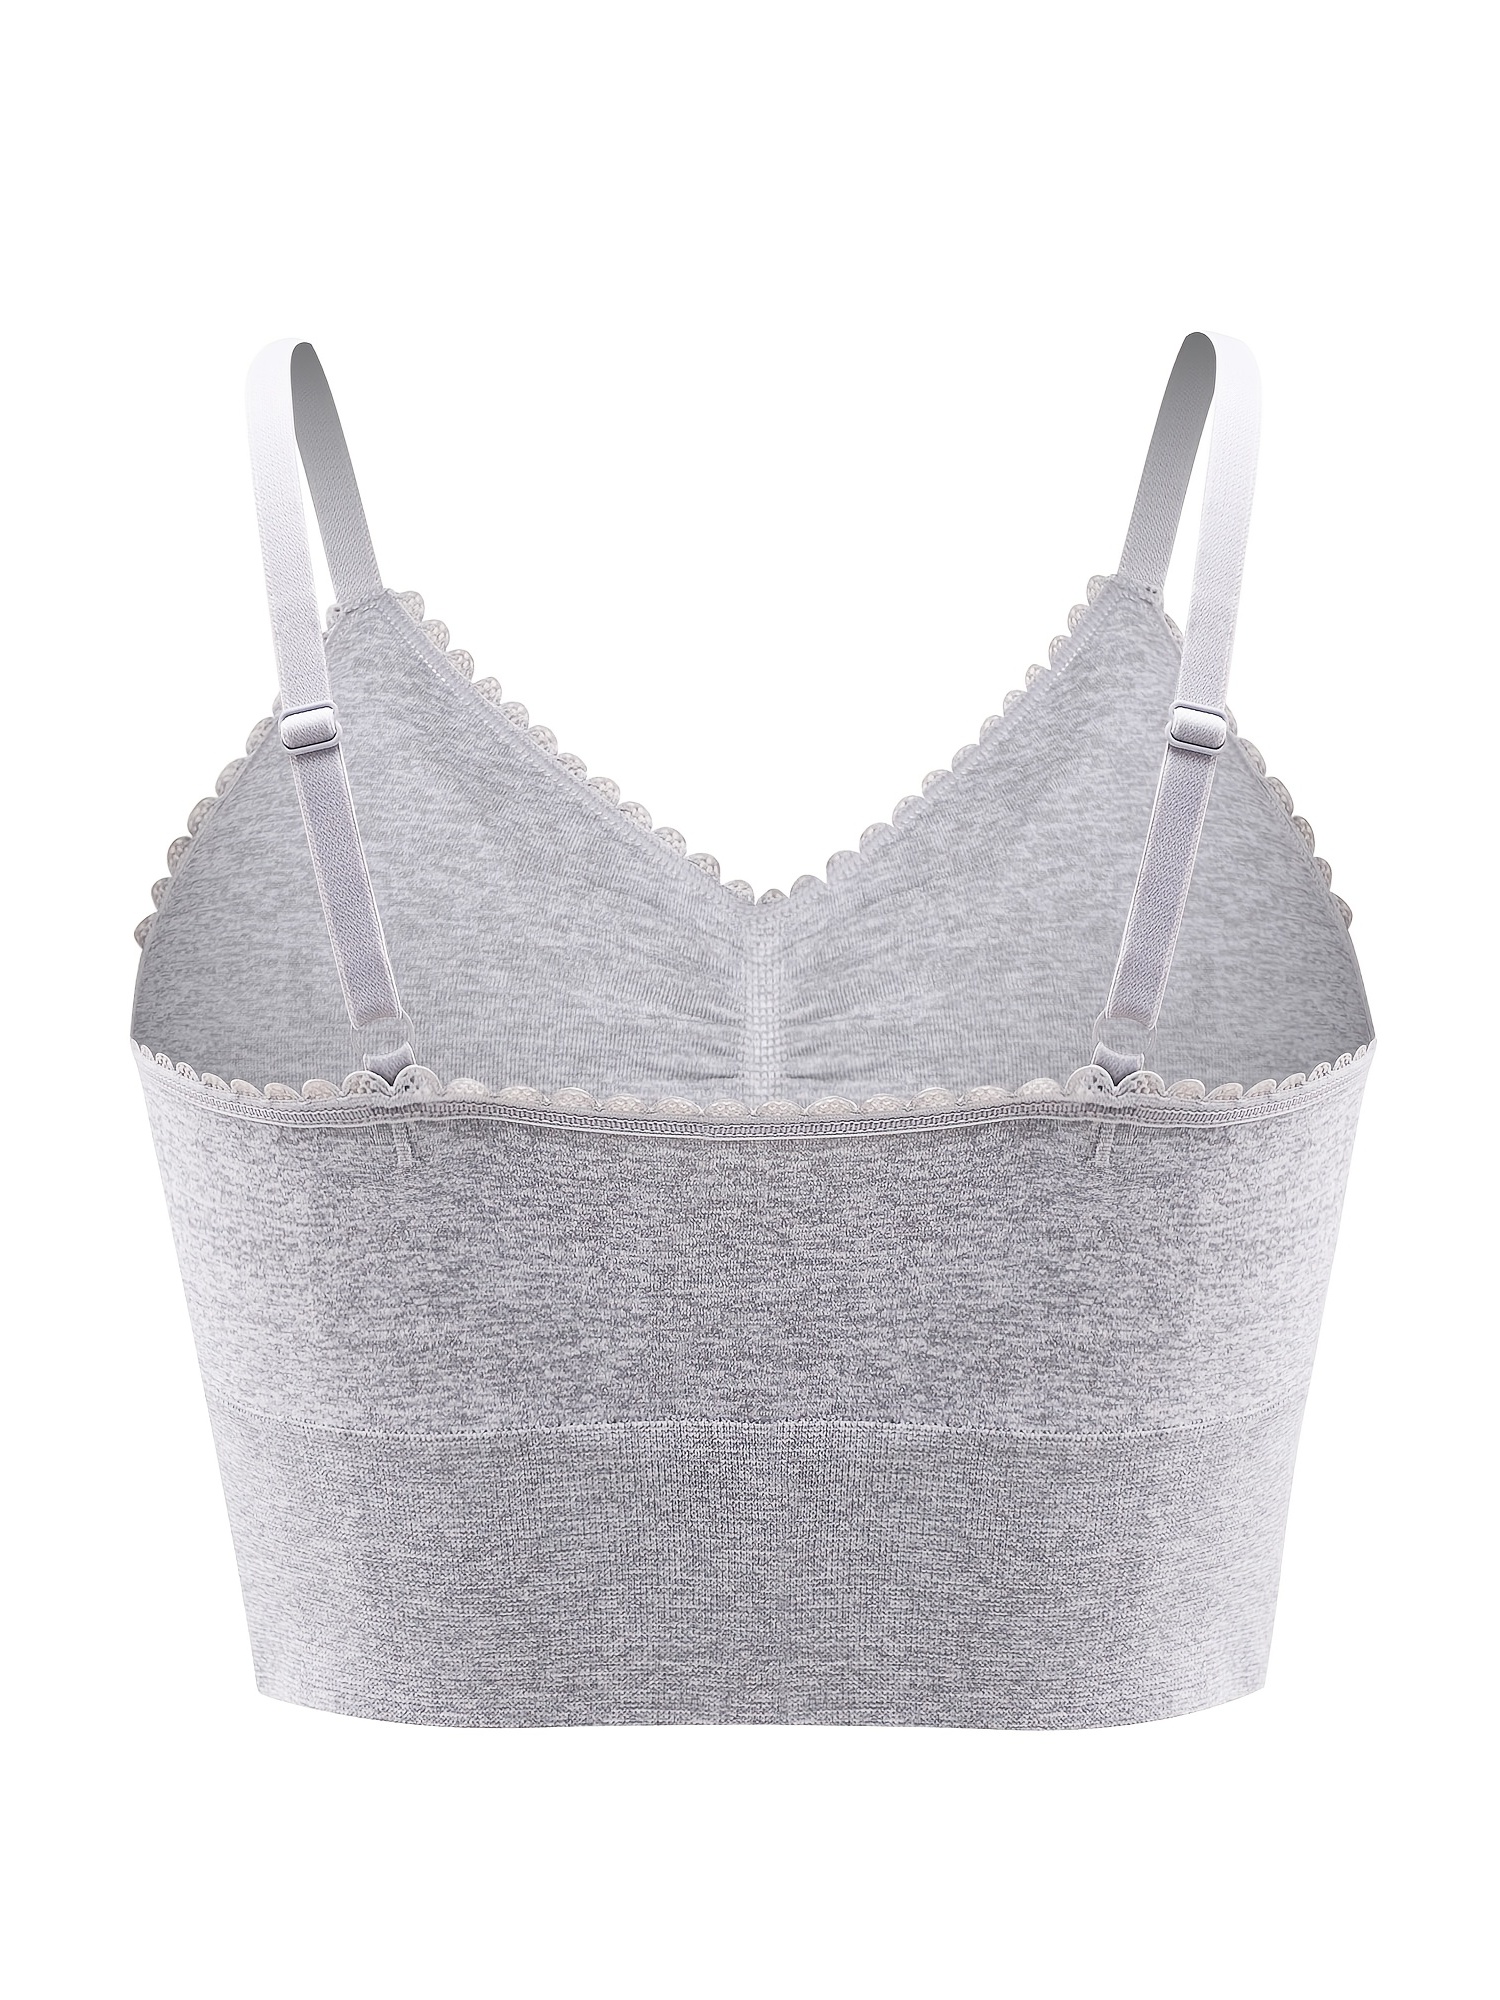 Lace Straps Bralettes for Women Padded Sports Bra Seamless Comfort Bra  Wirefree Yoga Cami Tank Tops Bras for Womens (Gray, M) at  Women's  Clothing store